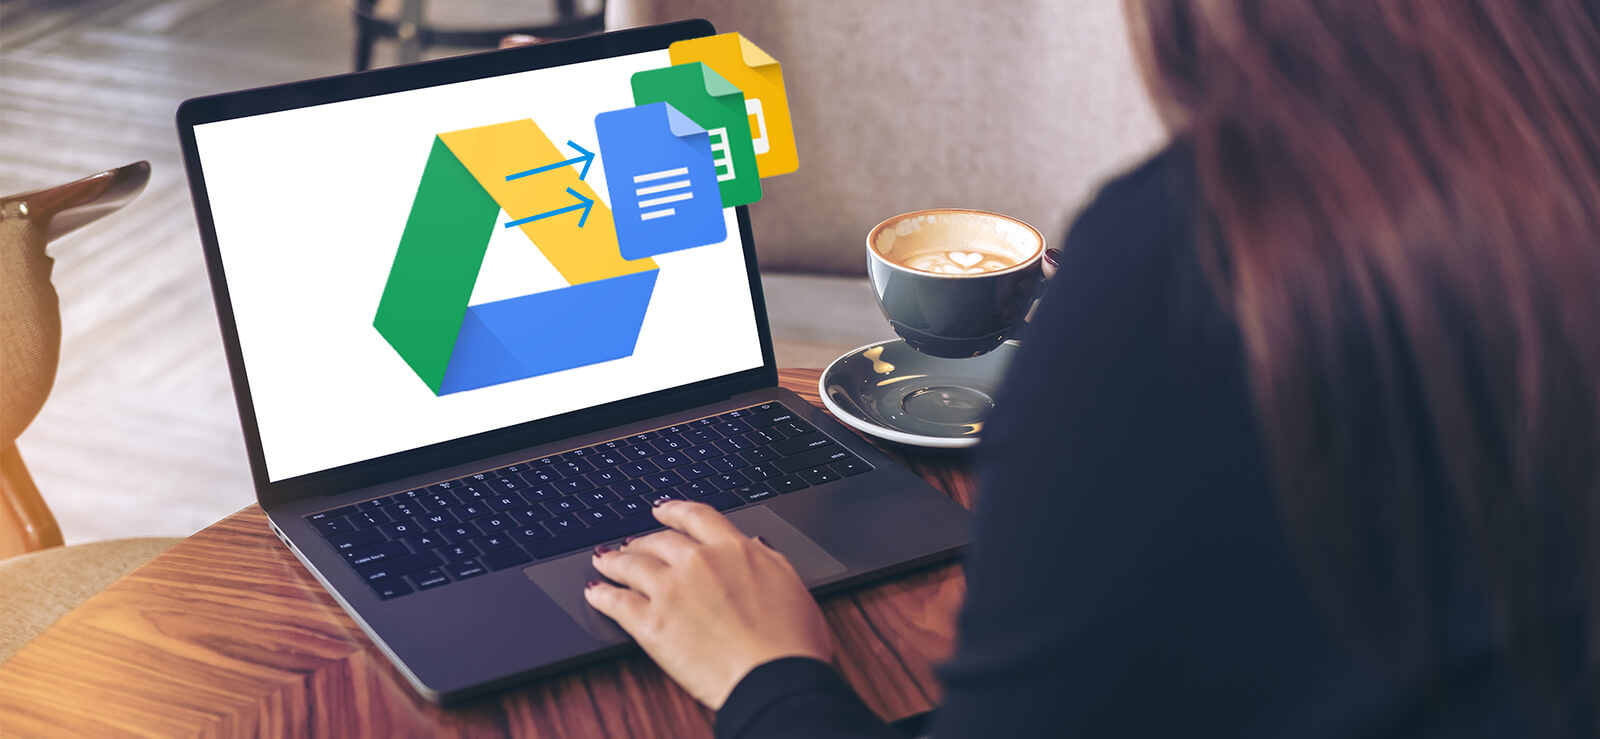 Ways to Import Files to Google Drive